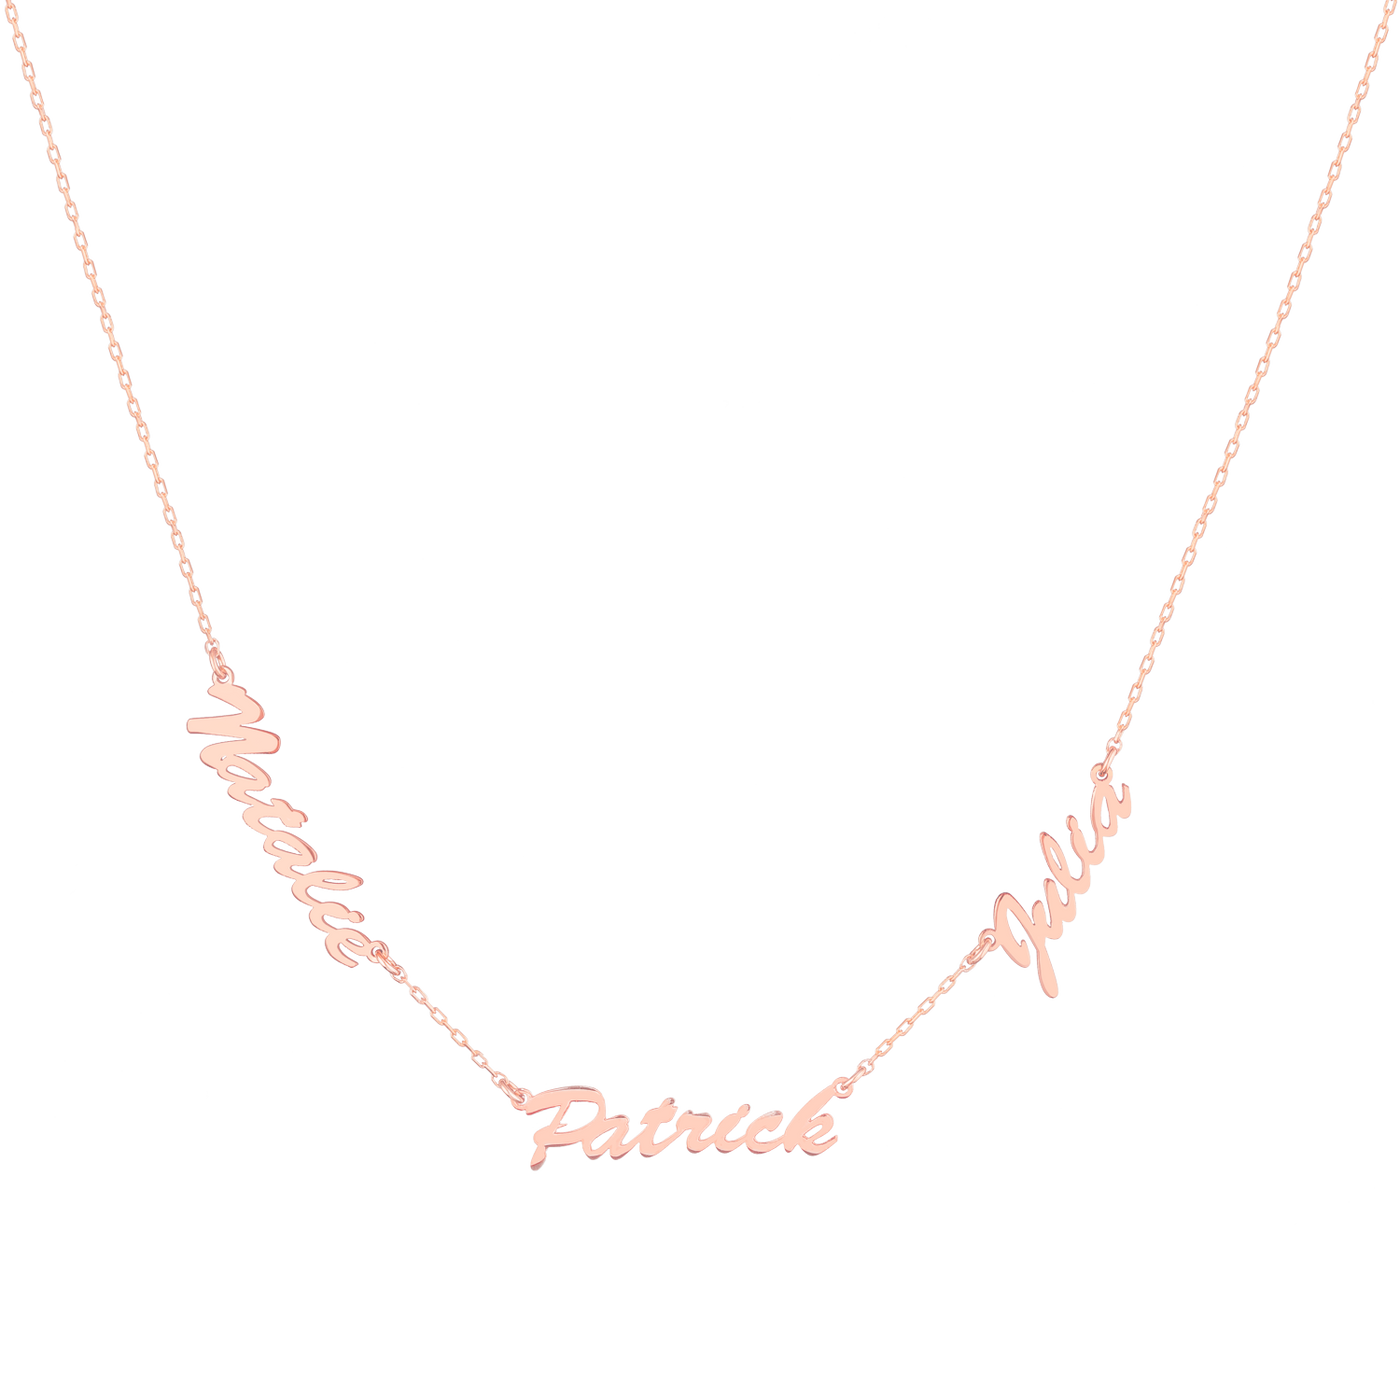 Name necklace with multiple names